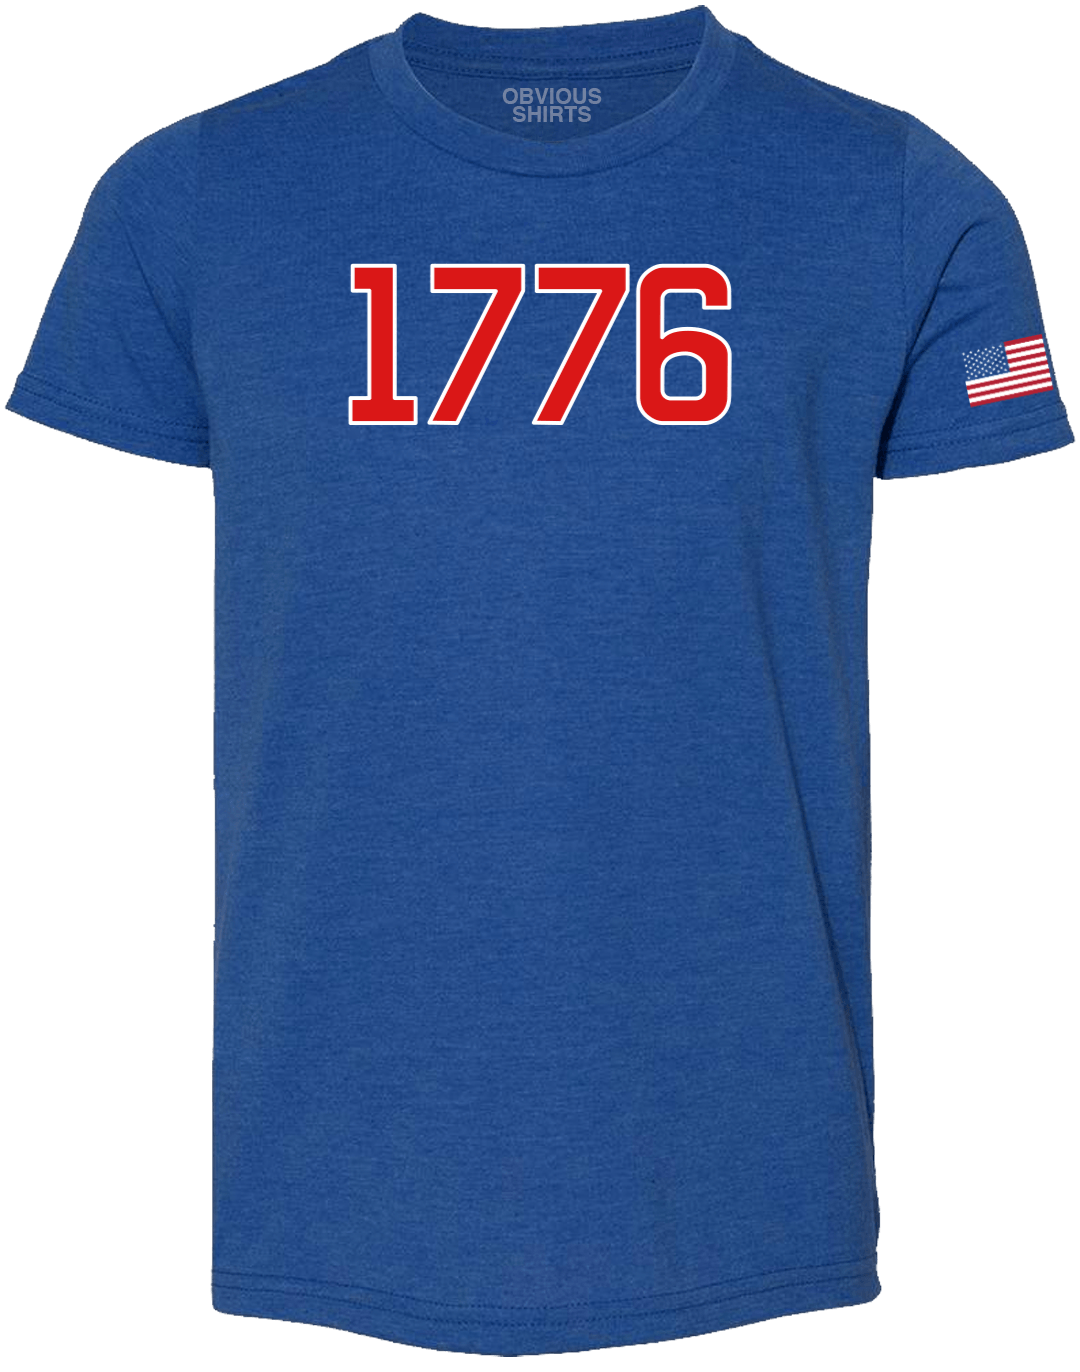 1776 (YOUTH) - OBVIOUS SHIRTS